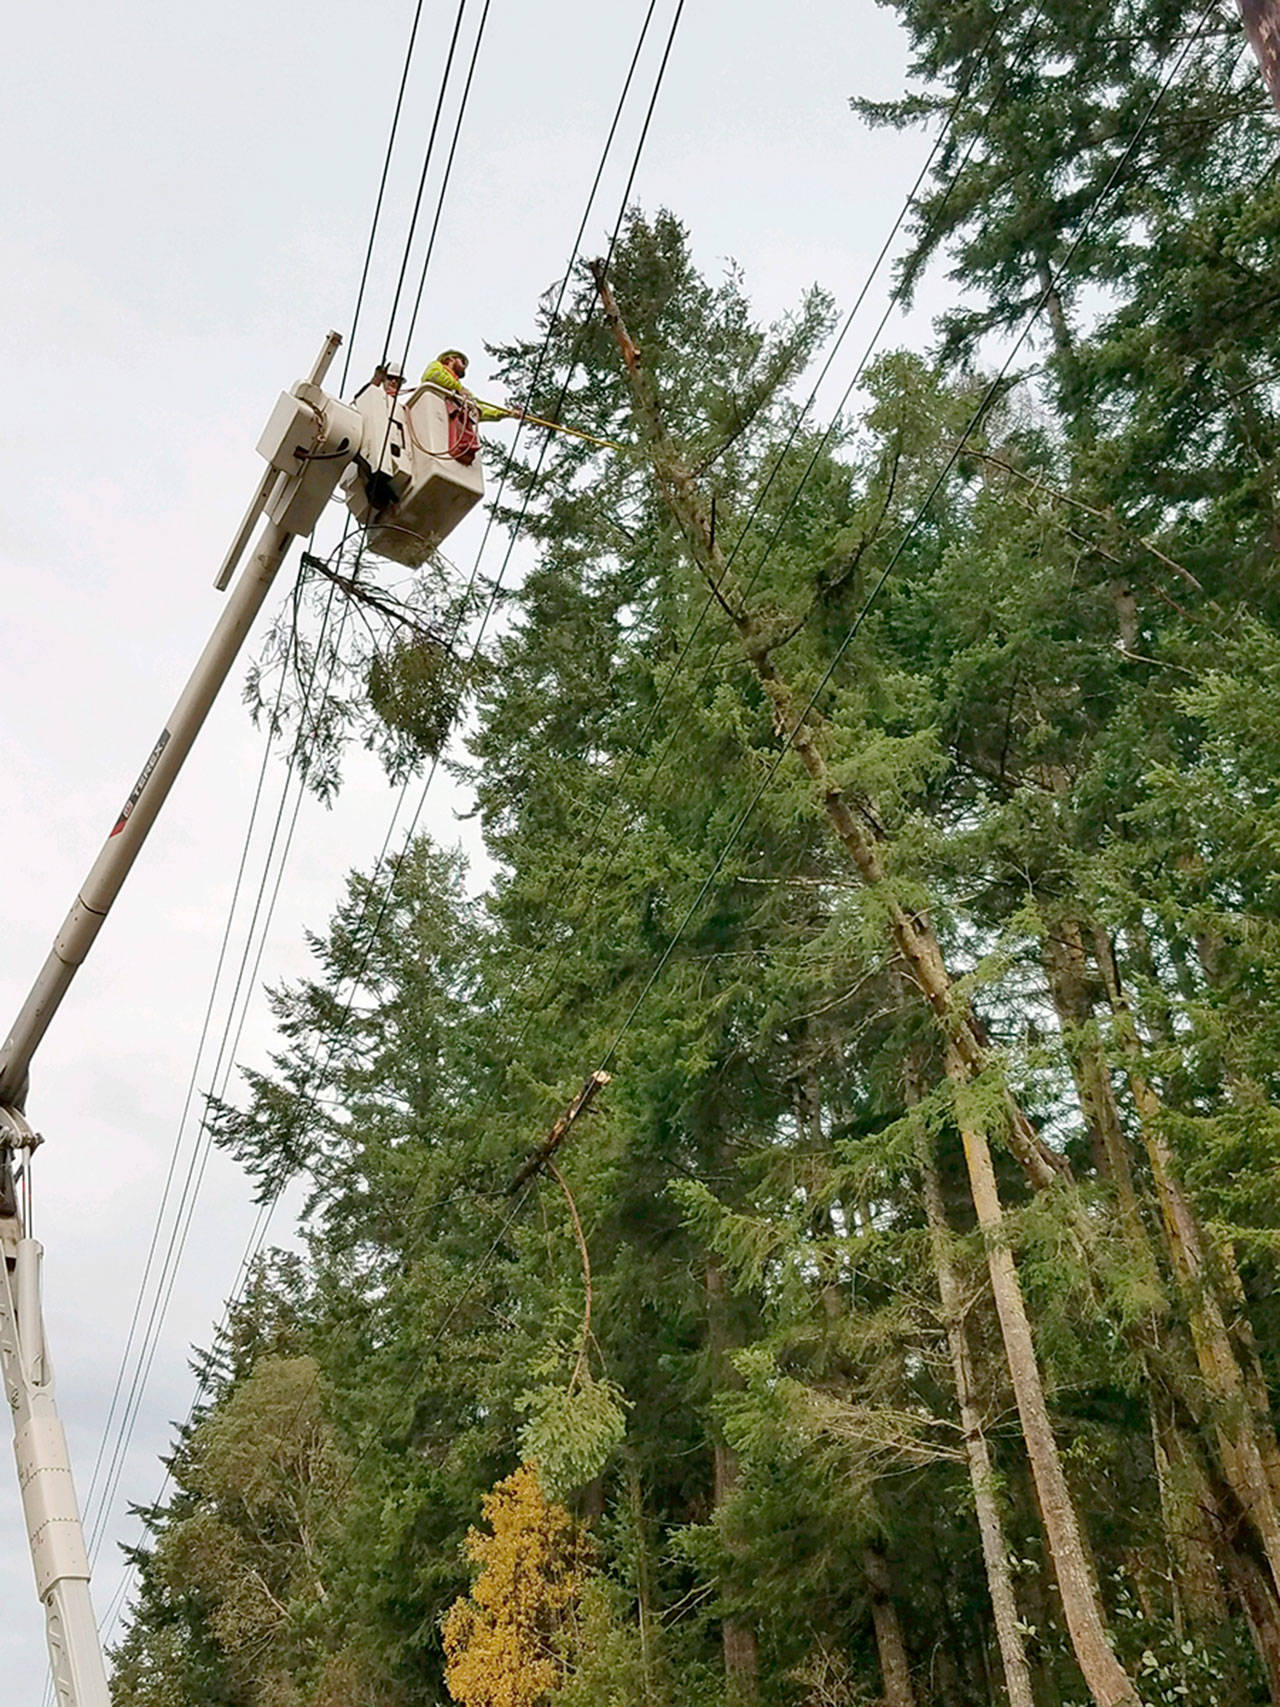 Jefferson County Public Utility District crew members push a tree off a transmission line after it disrupted power for 16,035 electrical customers. (Jefferson County Public Utility District)